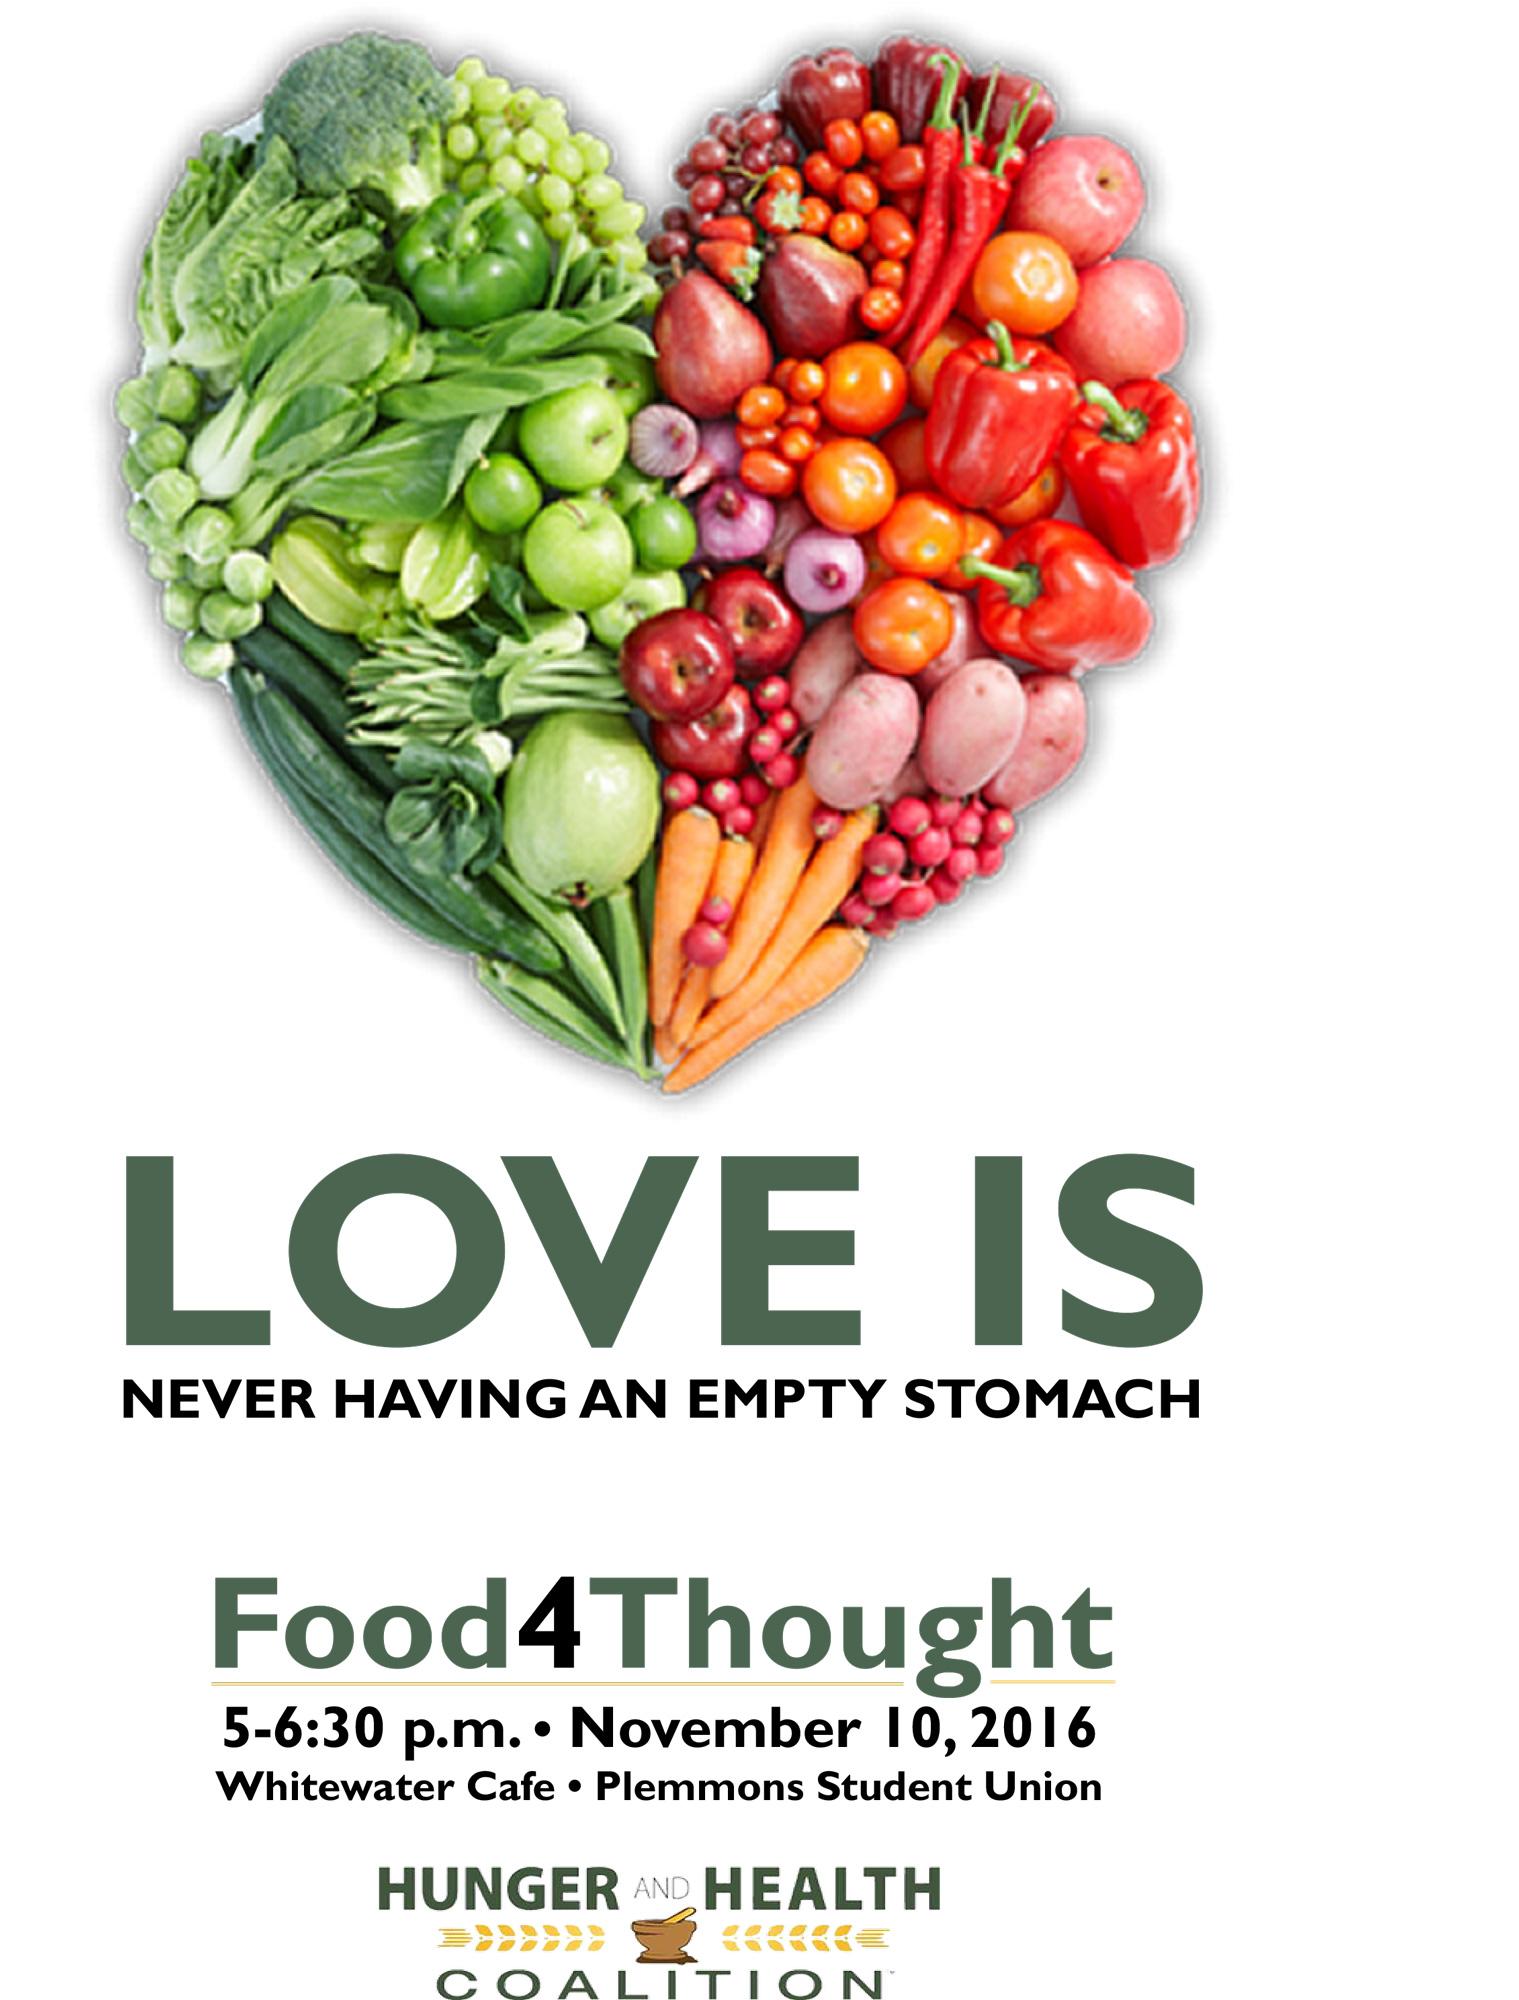 Flier for Food4Thought. Courtesy of Amanda Wallace